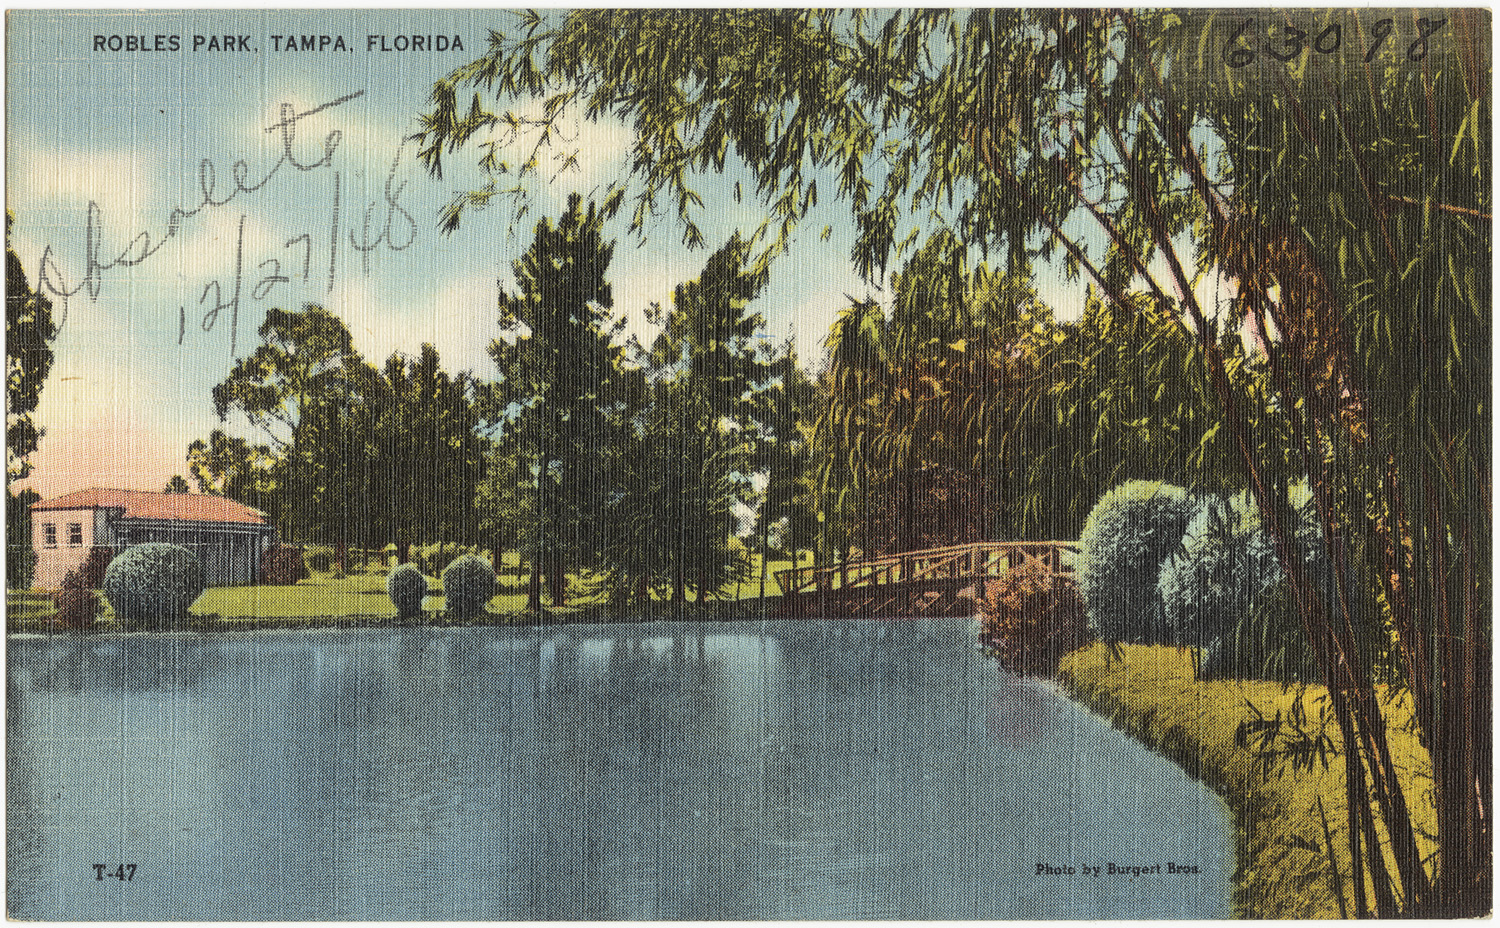 the old postcard features an impression of trees and a body of water